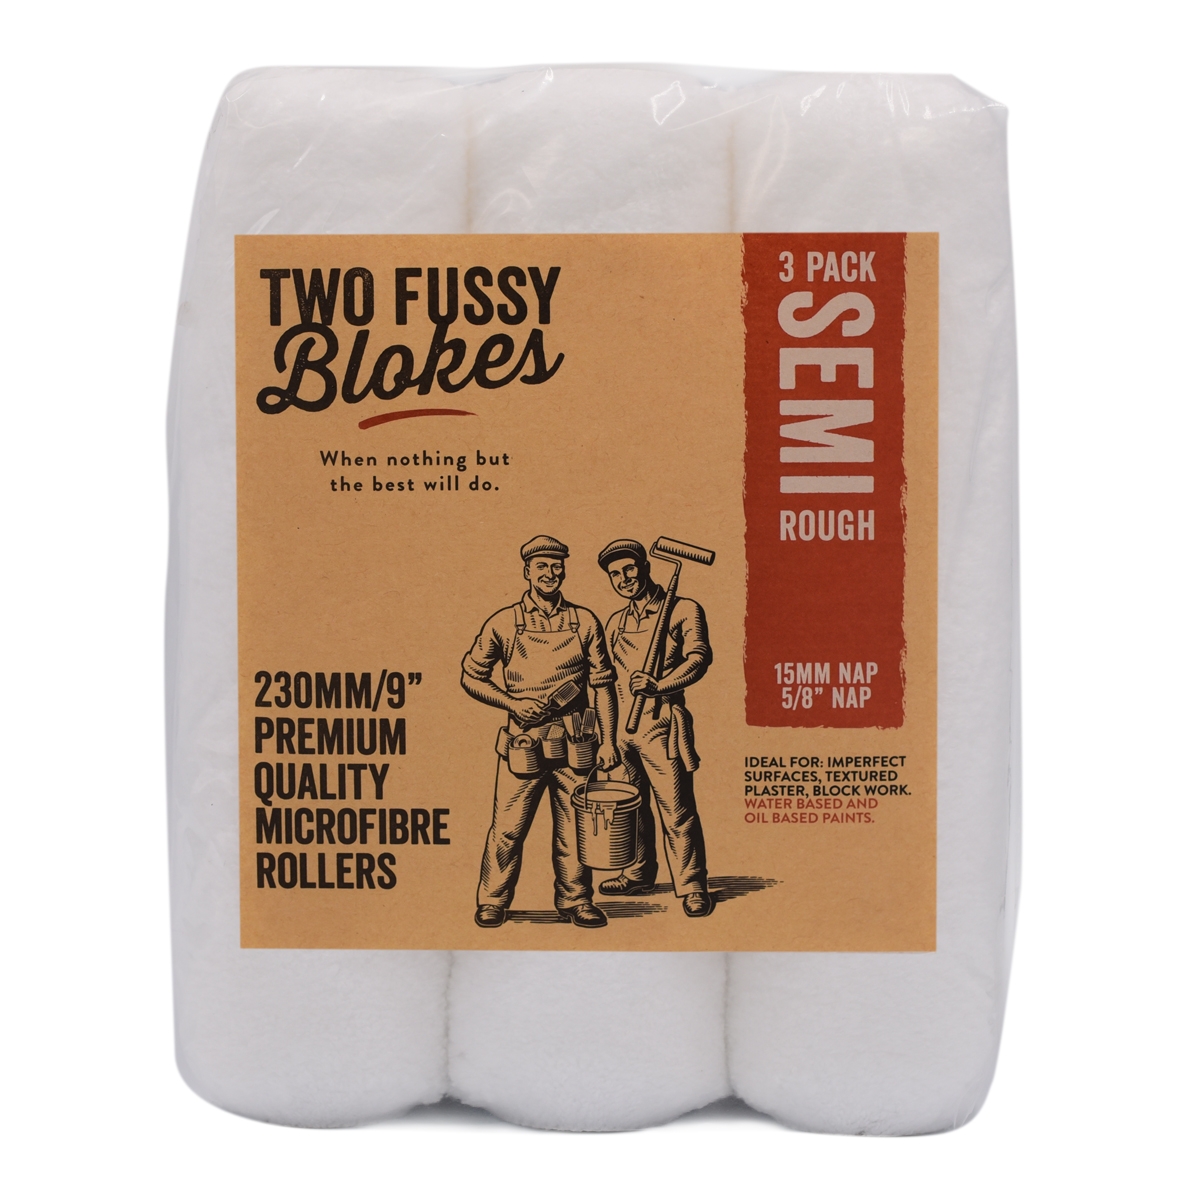 Two Fussy Blokes Microfibre Roller Sleeves 230 x 15mm Nap Semi-Smooth-Plus (3 Pack)